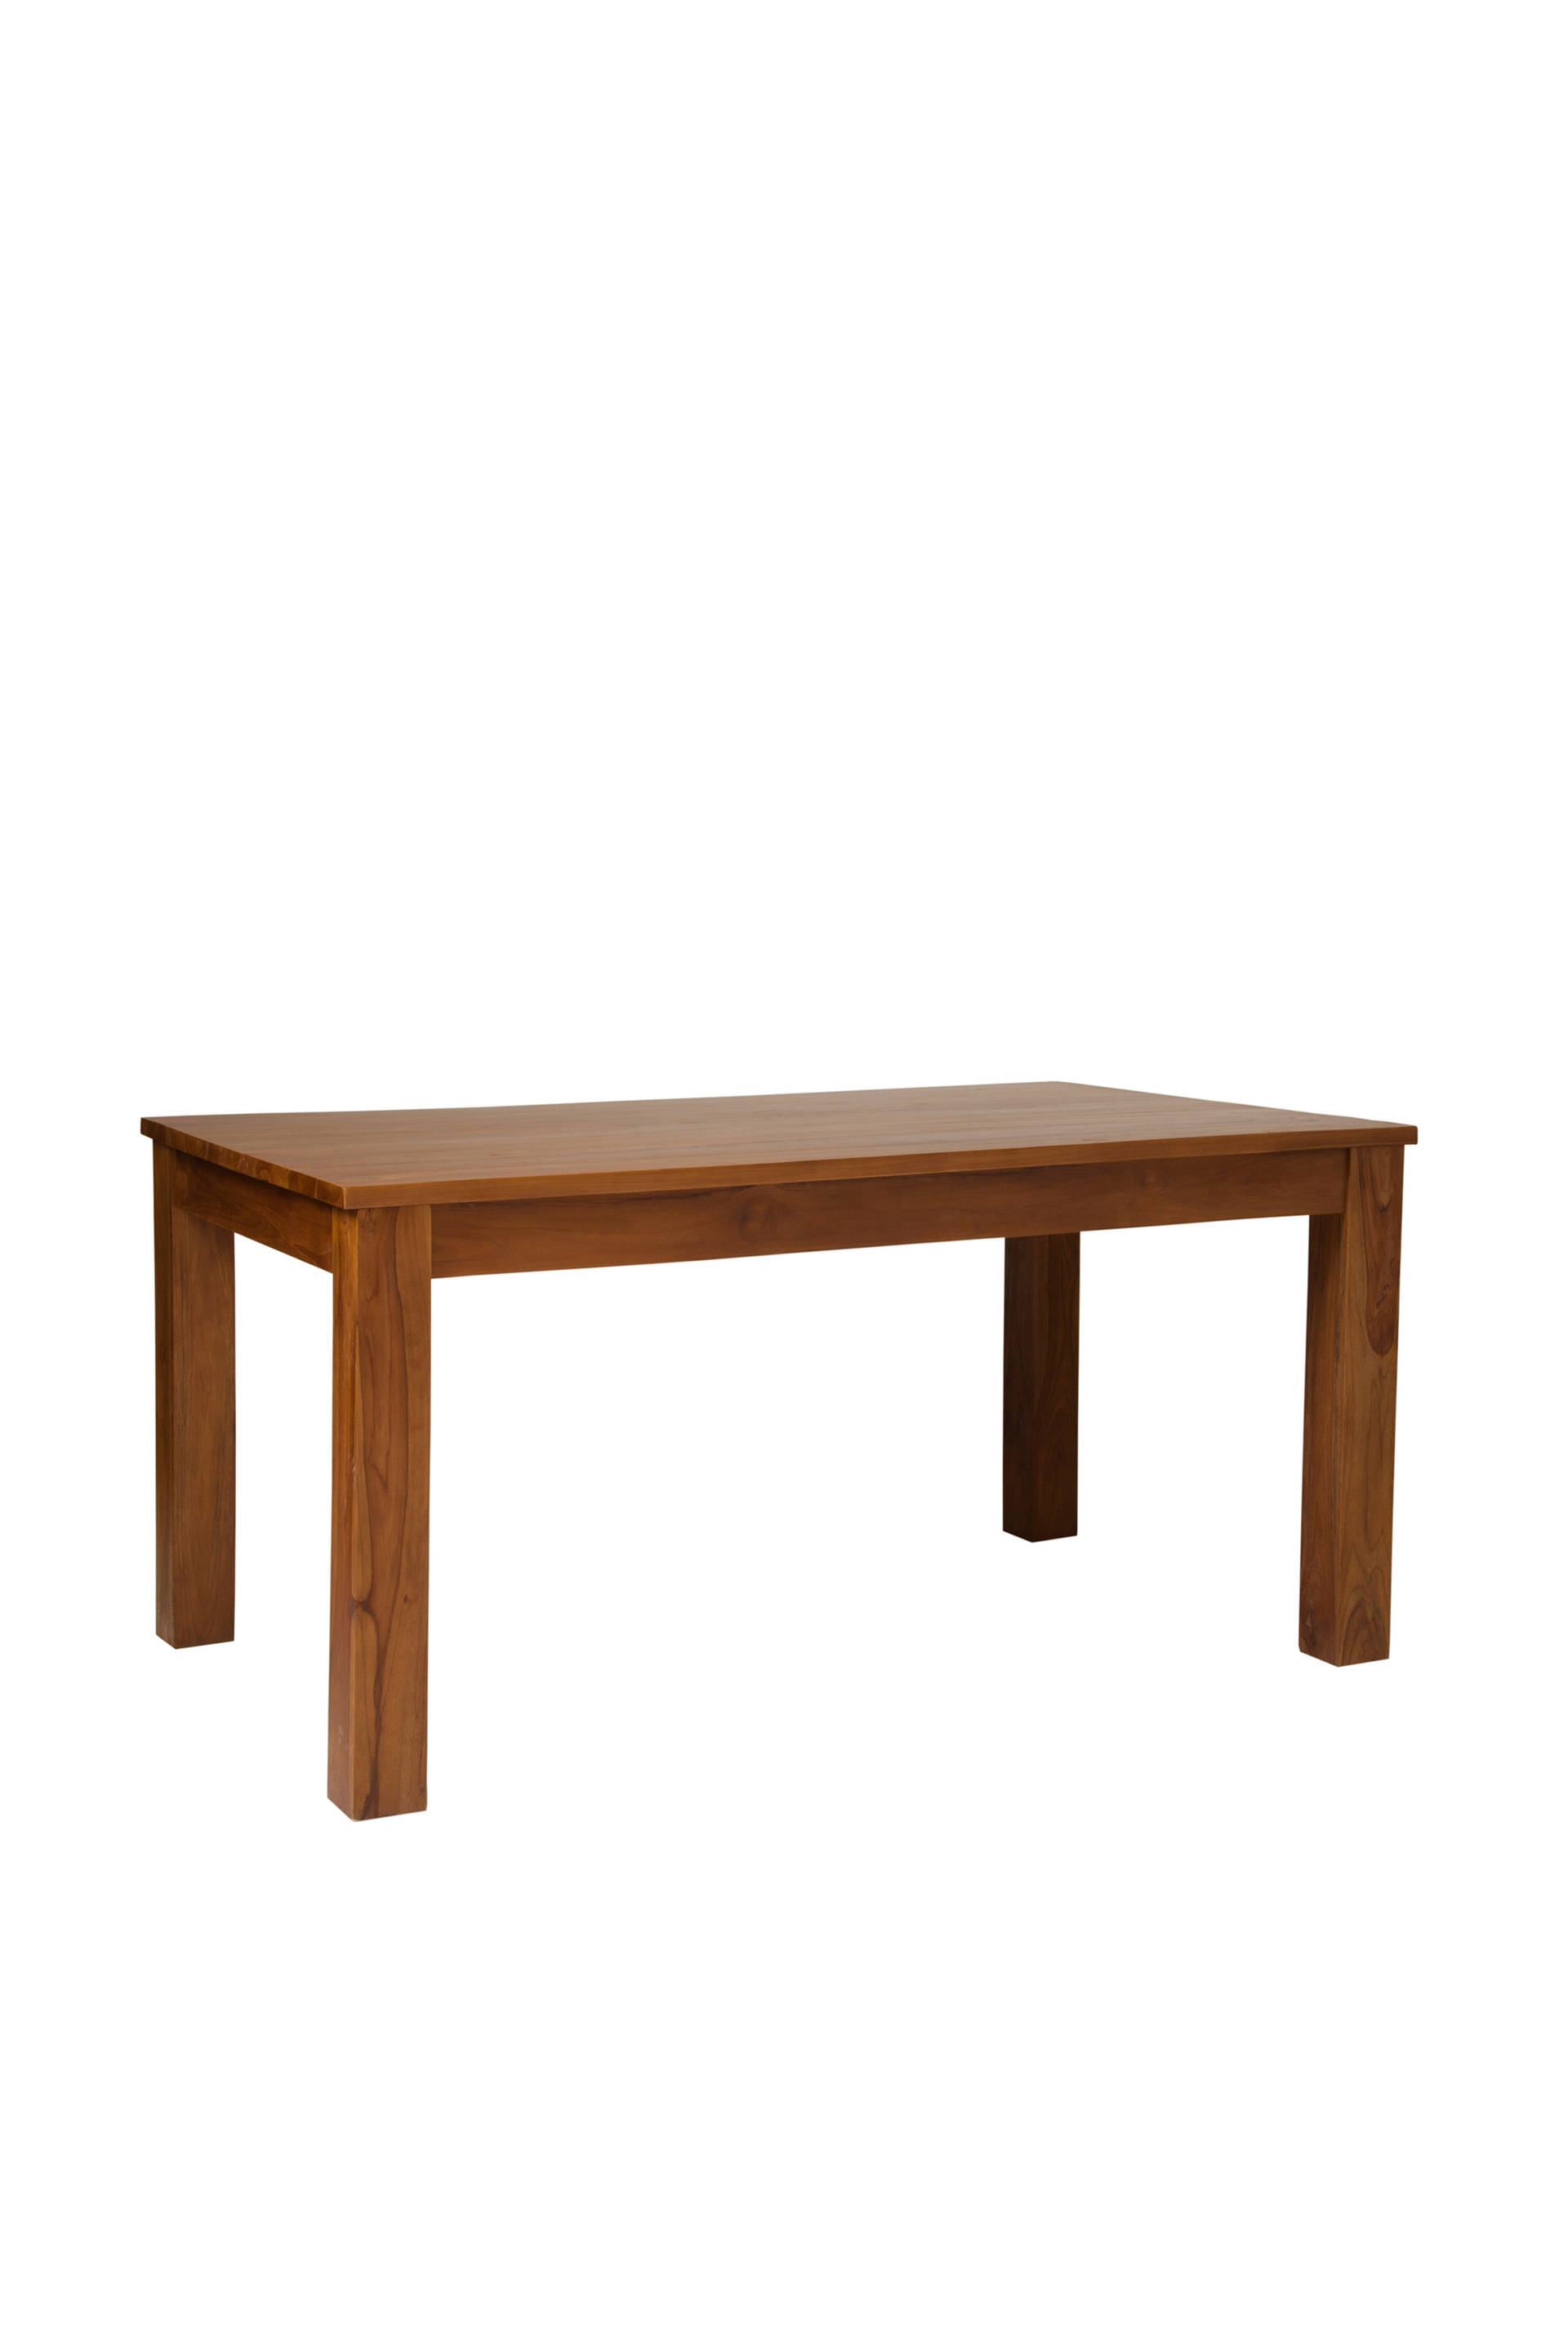 STRAIGHT DINING TABLE 165